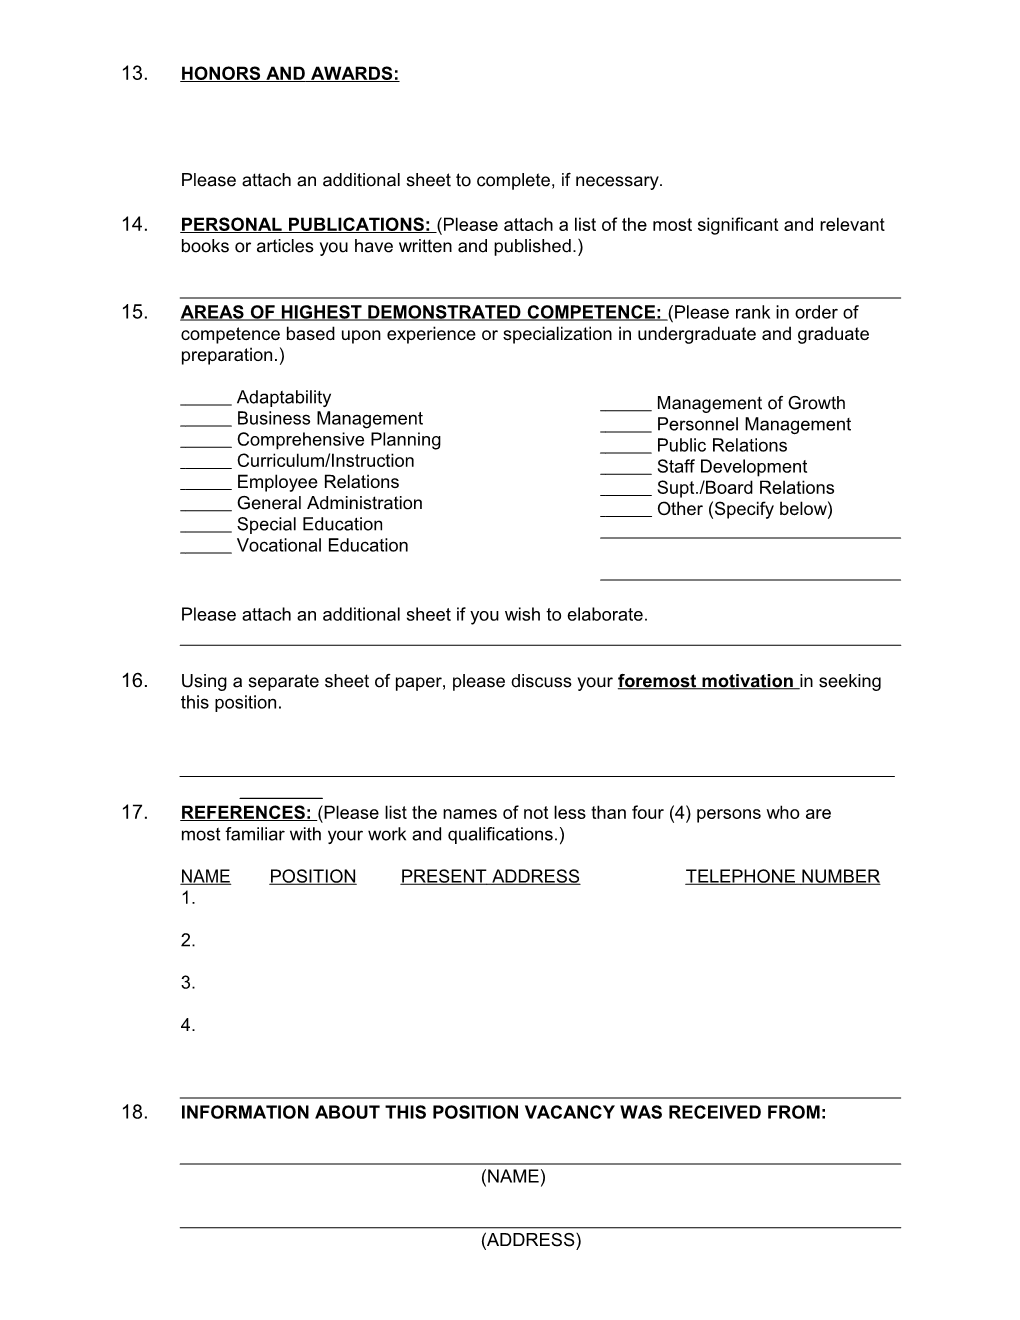 Application for the Position of Assistant Superintendent Ofschoolsking and Queen County